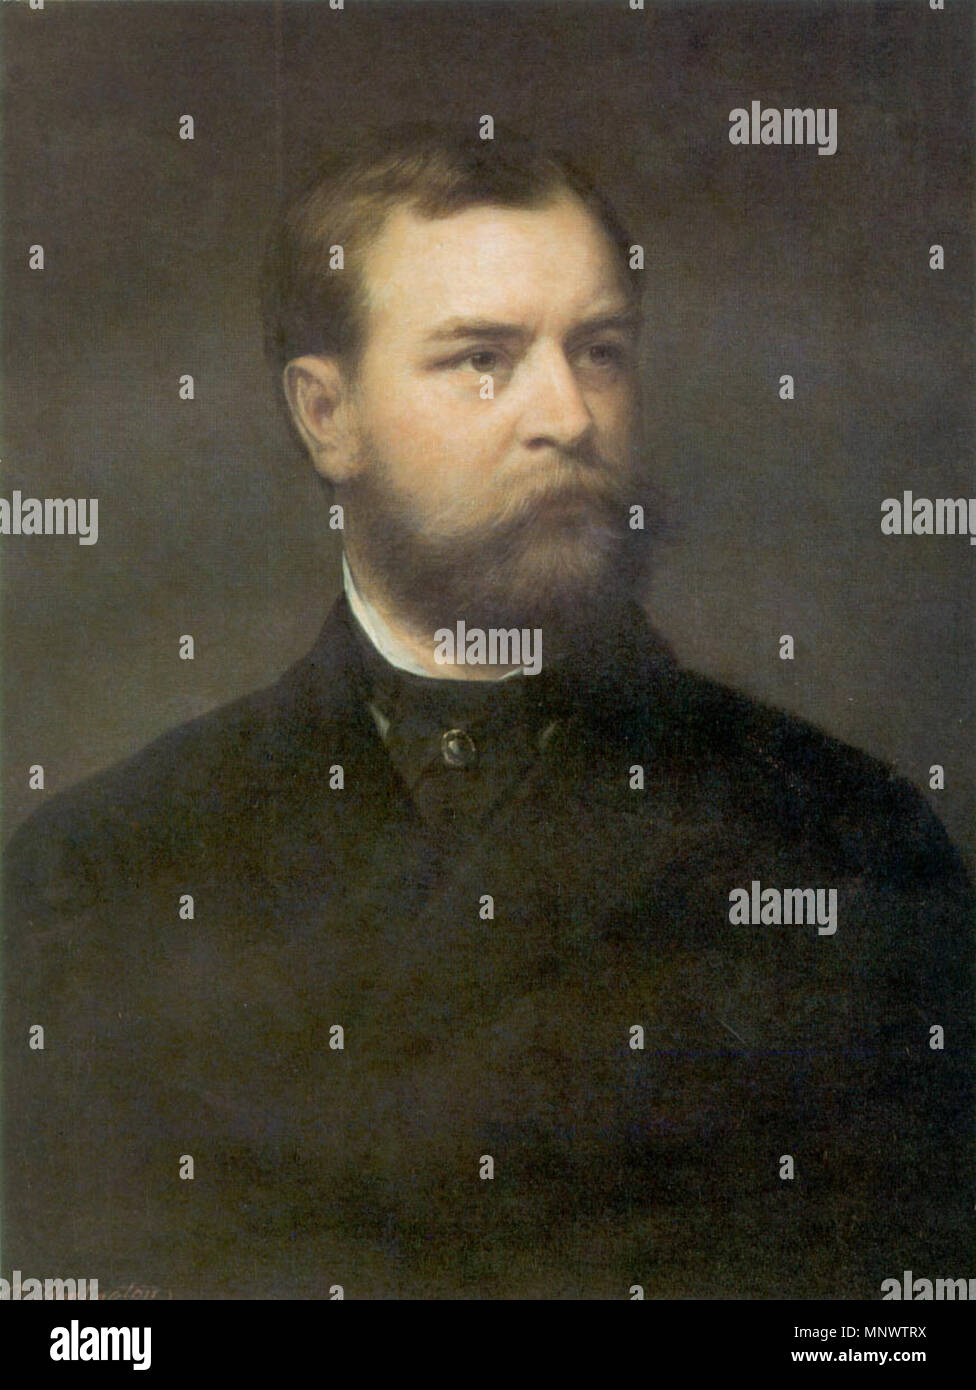 . Robert Todd Lincoln . 1885.   Daniel Huntington  (1816–1906)     Alternative names Daniel P. Huntington; dan. huntington  Description American artist and painter  Date of birth/death October 4, 1816 April 19, 1906  Location of birth/death New York City New York City  Authority control  : Q323987 VIAF: 23216629 ISNI: 0000 0000 6681 0816 ULAN: 500017937 LCCN: nr91002048 GND: 129355194 WorldCat 1068 Robert Todd Lincoln Stock Photo